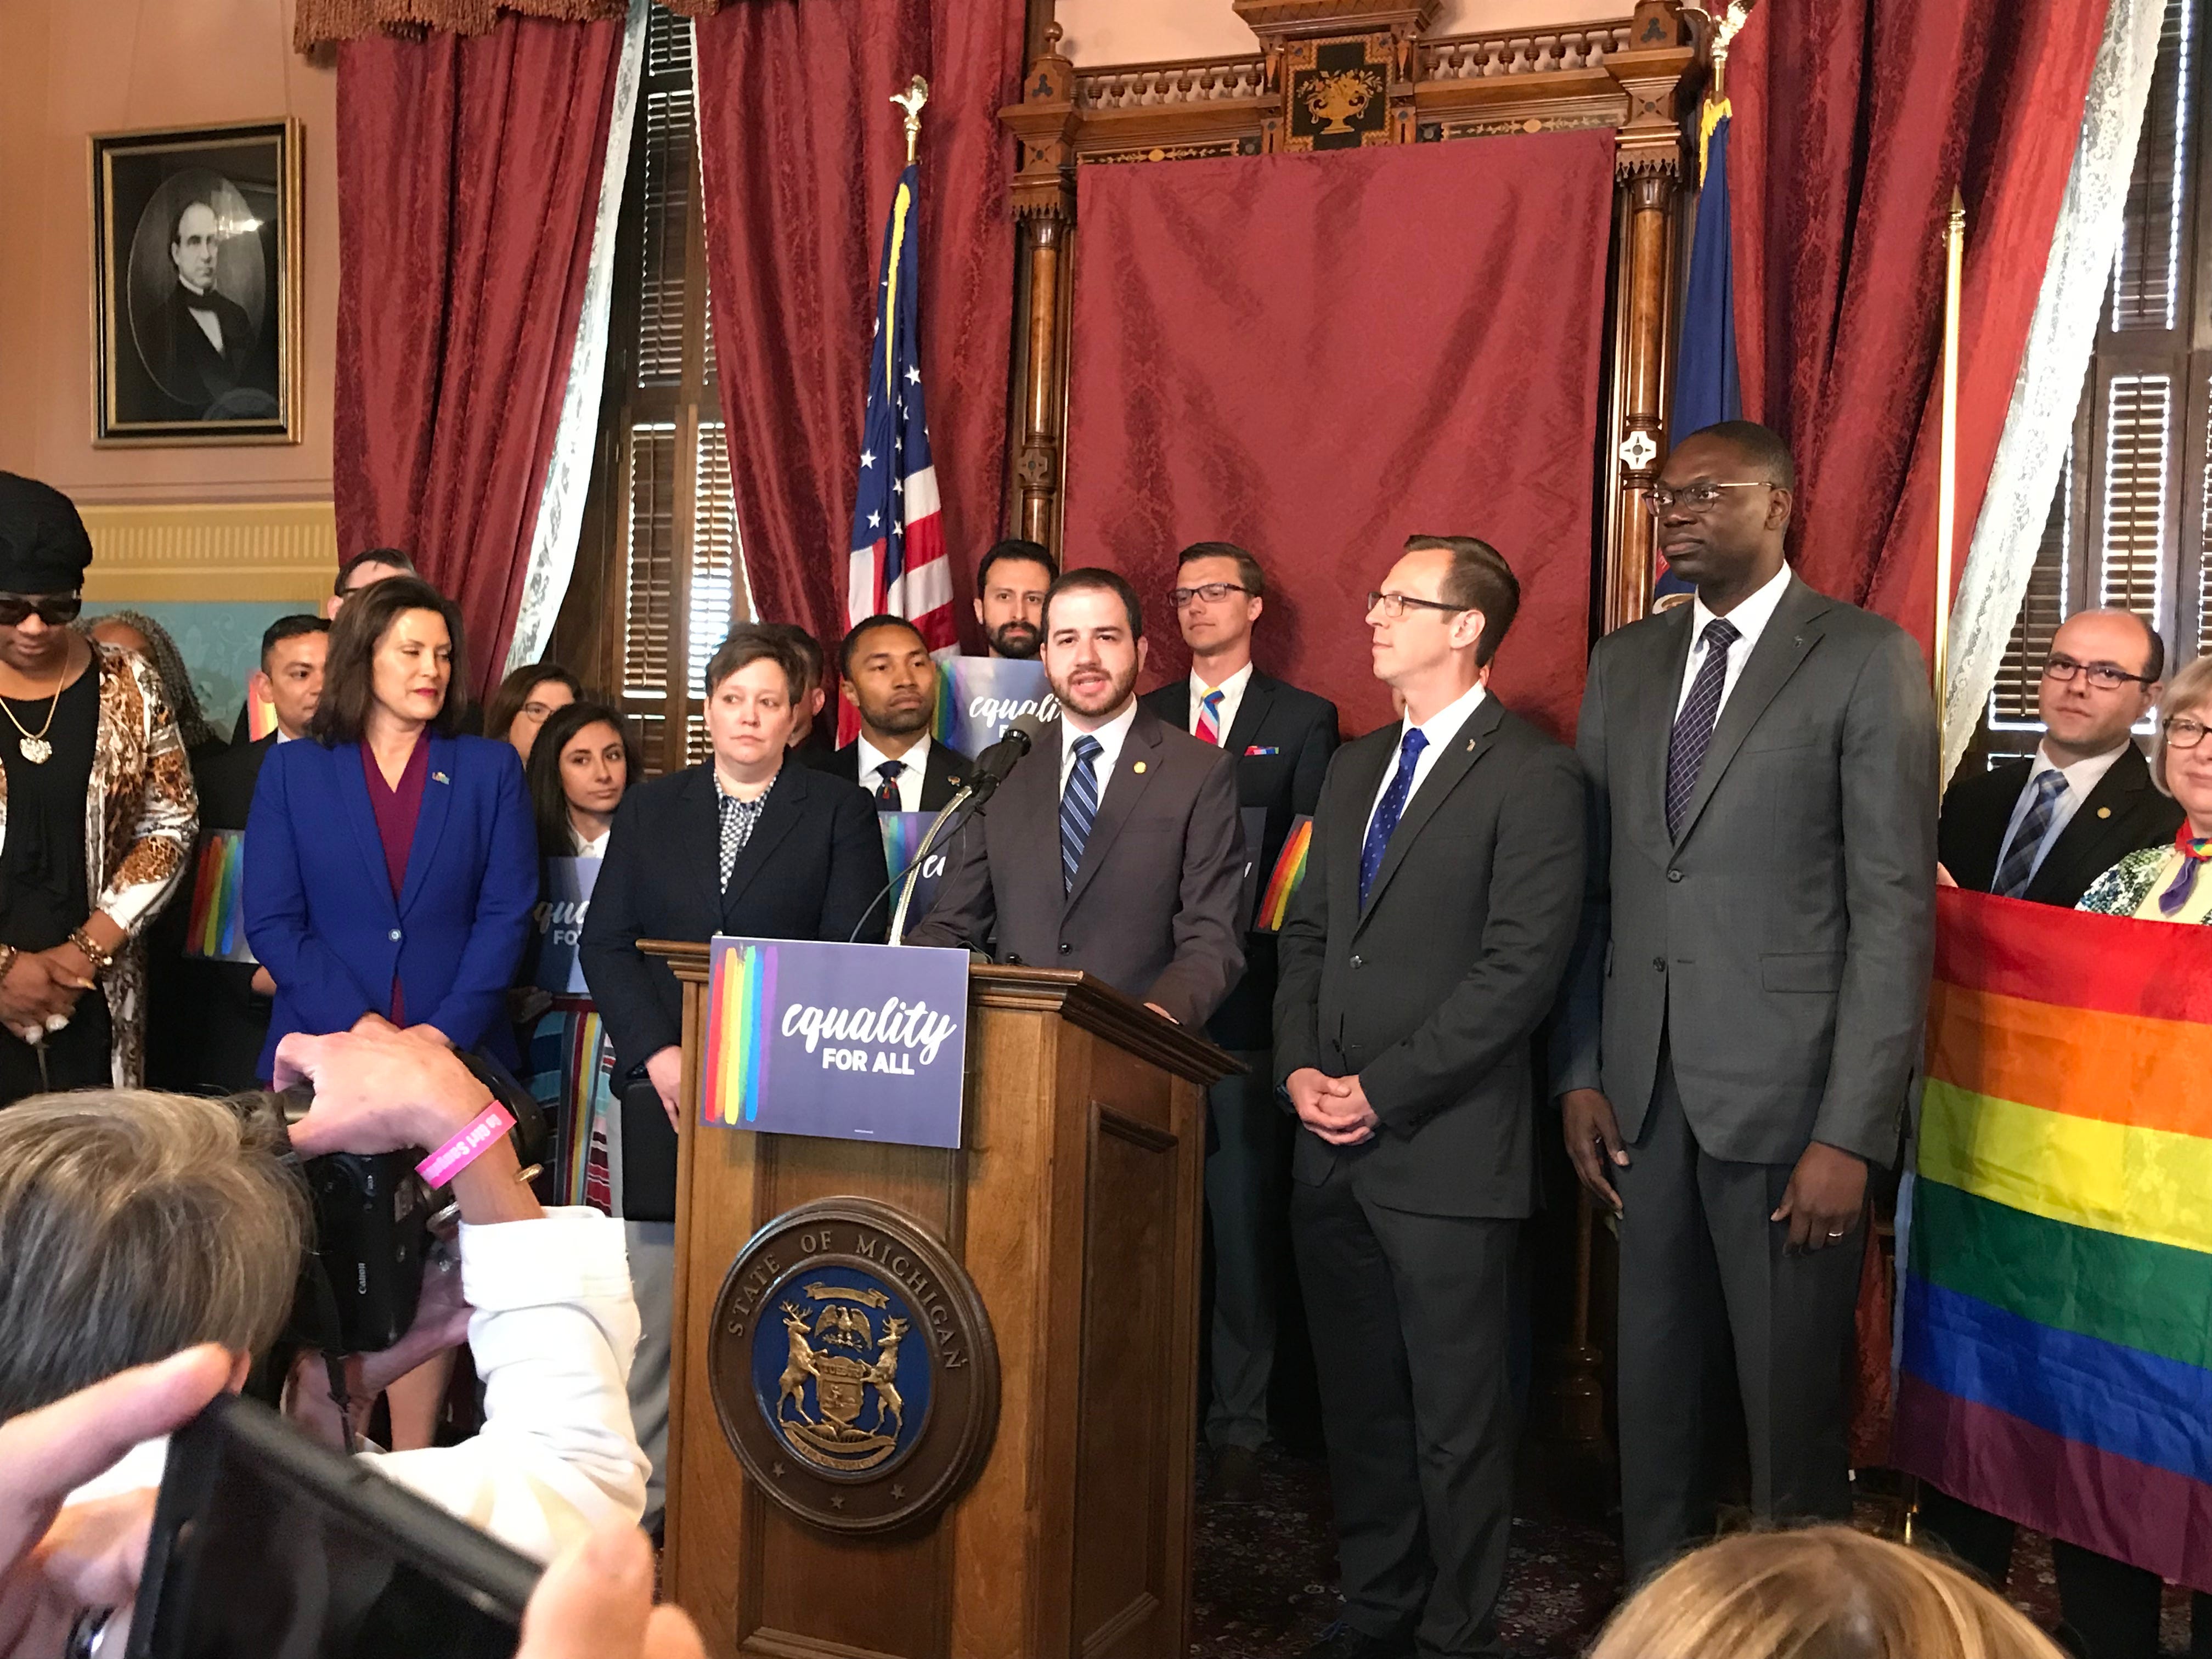 Sen. Jeremy Moss, D-Southfield, speaks during a press conference on Tuesday, June 4, 2019 at the state Capitol about proposed legislation that would expand the Elliott-Larsen Civil Rights Act.